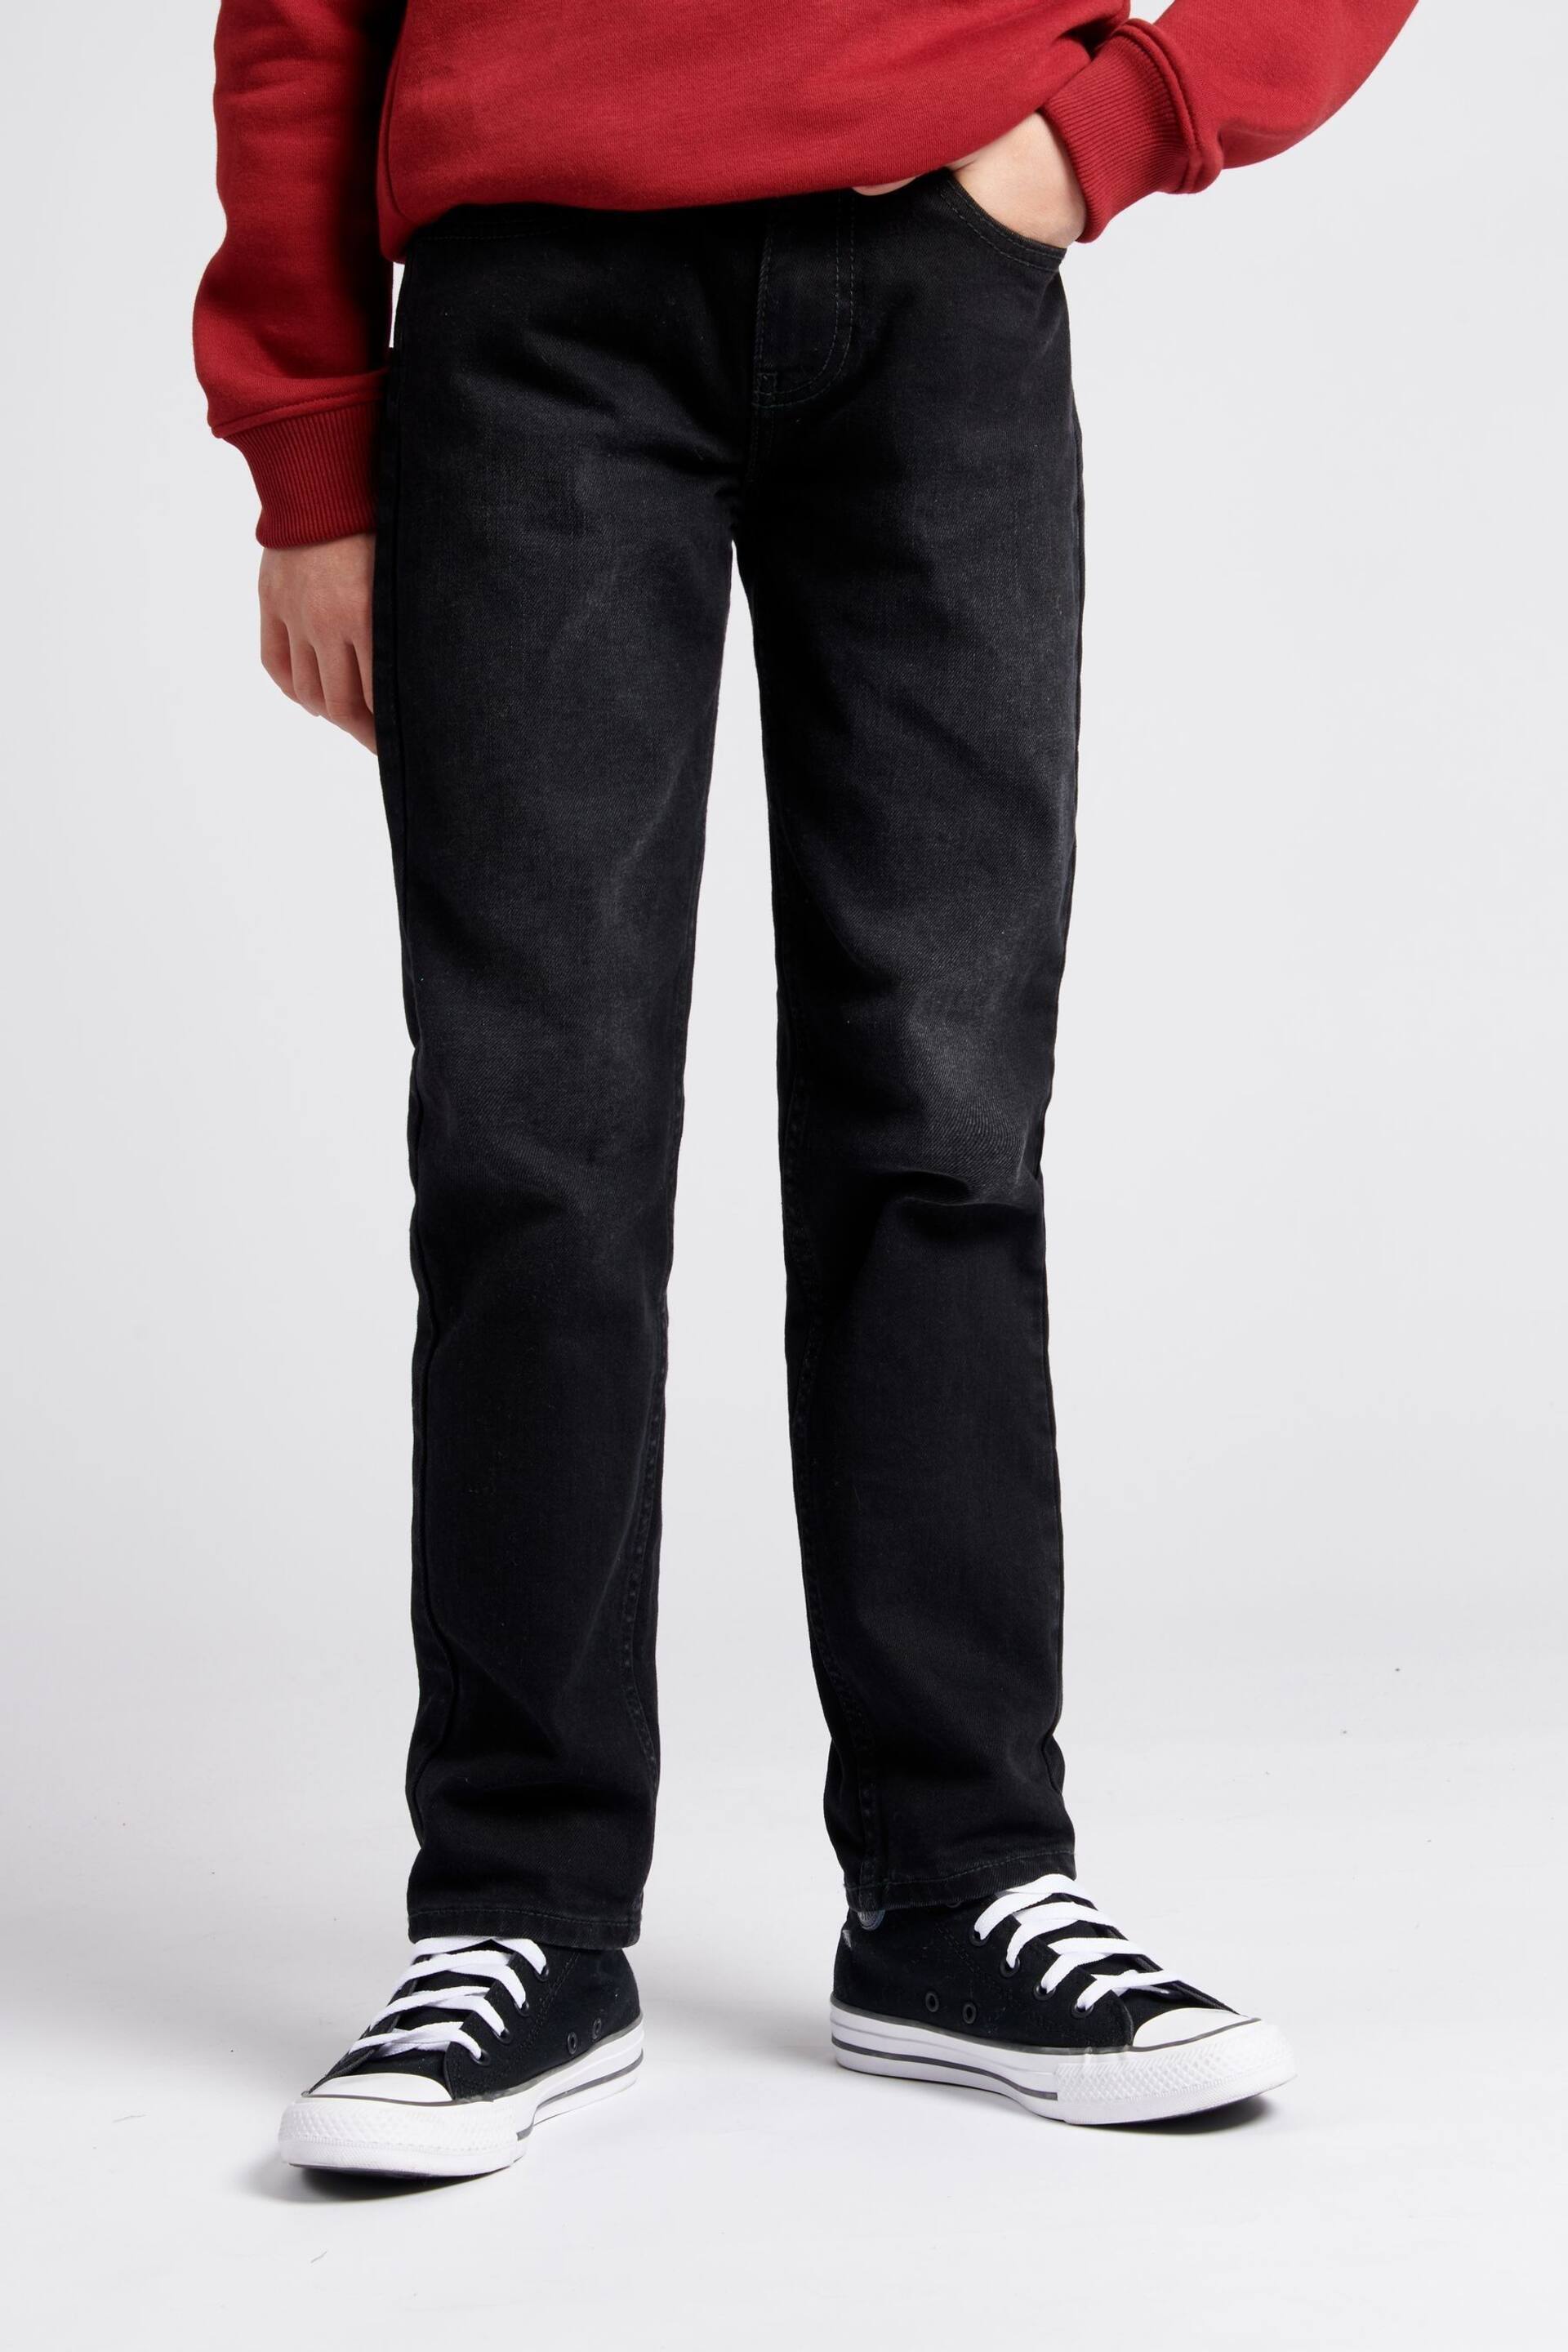 Lee Boys Relaxed Fit West Jeans - Image 1 of 7